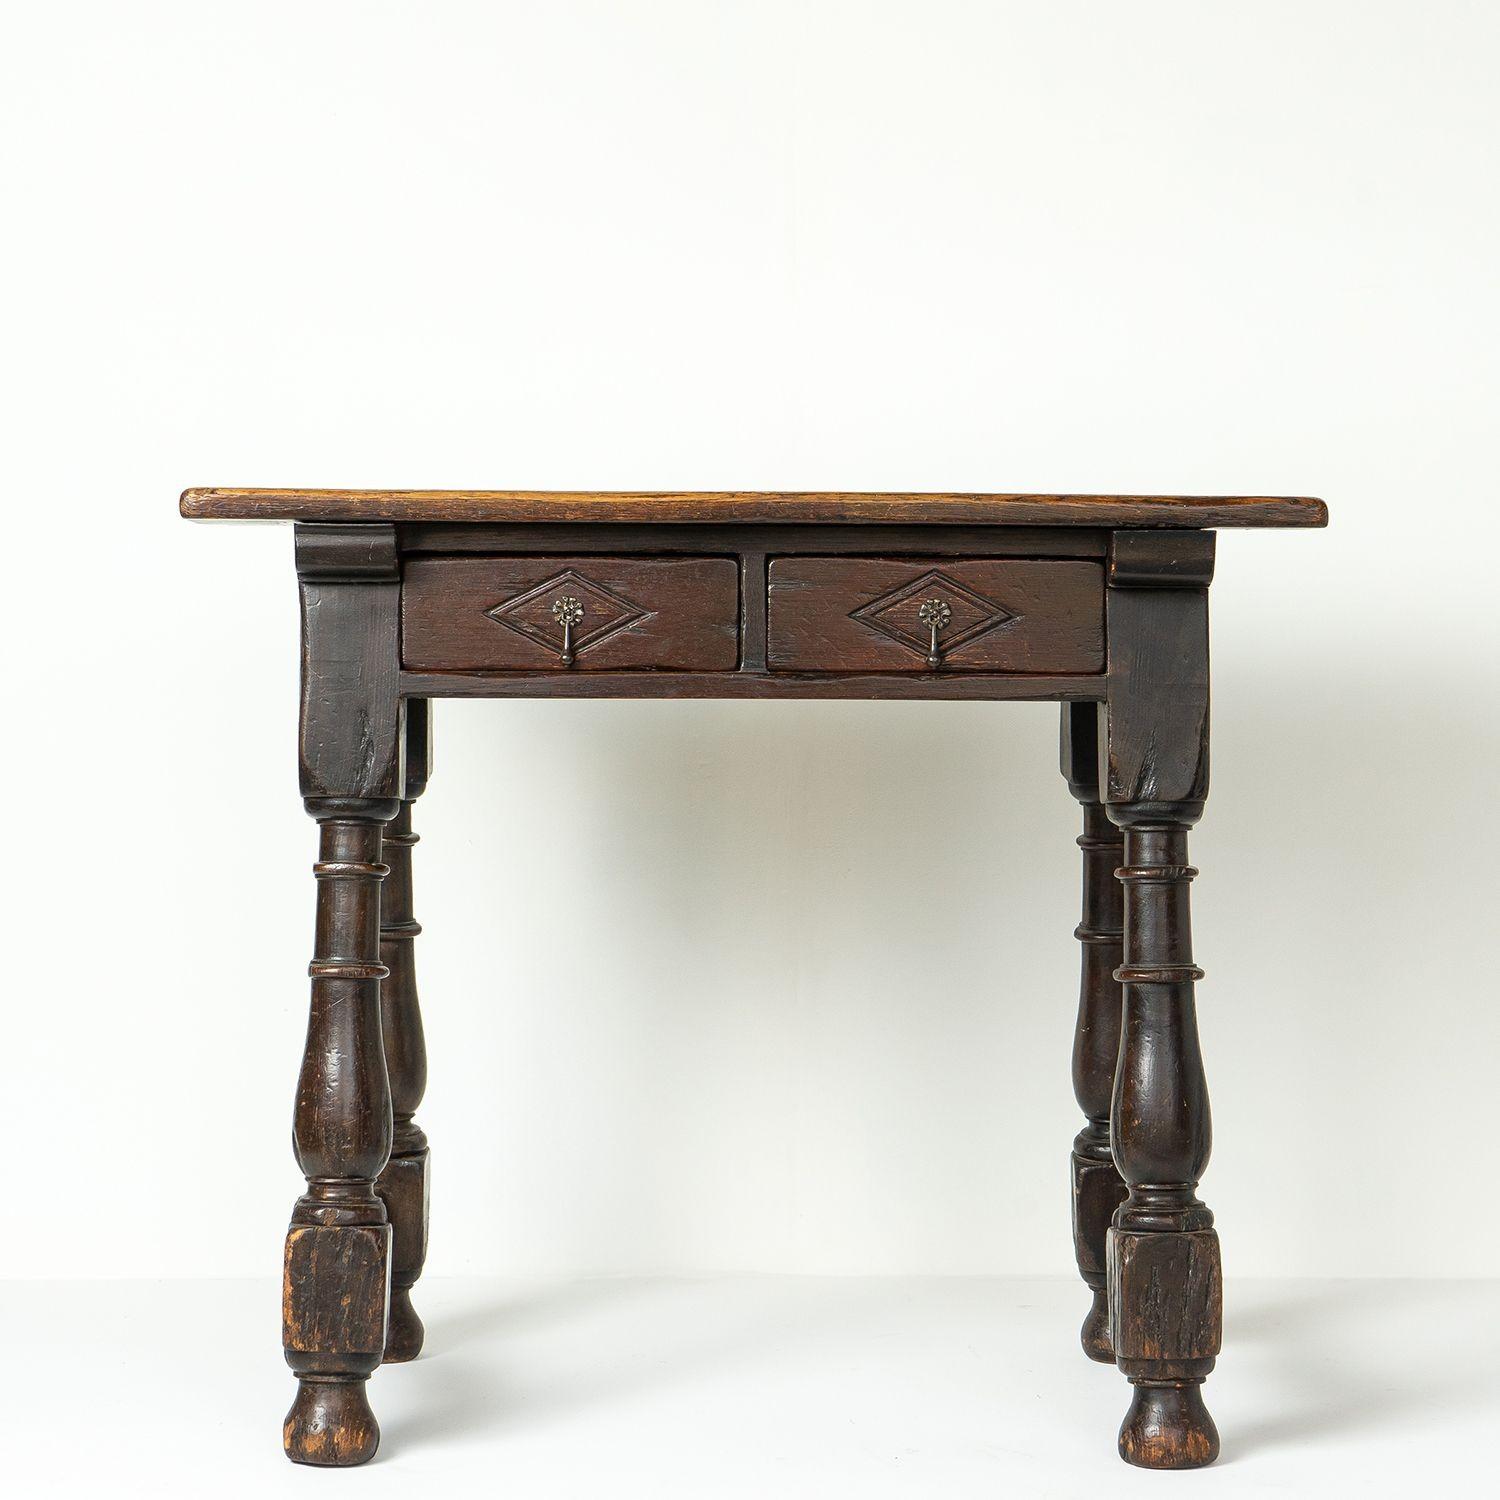 Antique rustic country made console table
A two-plank oak top above turned oversized baluster legs with shaped stretchers.
Two carved drawers with lozenge-shaped details and drop handles.
Looks equally great in a contemporary or more traditional